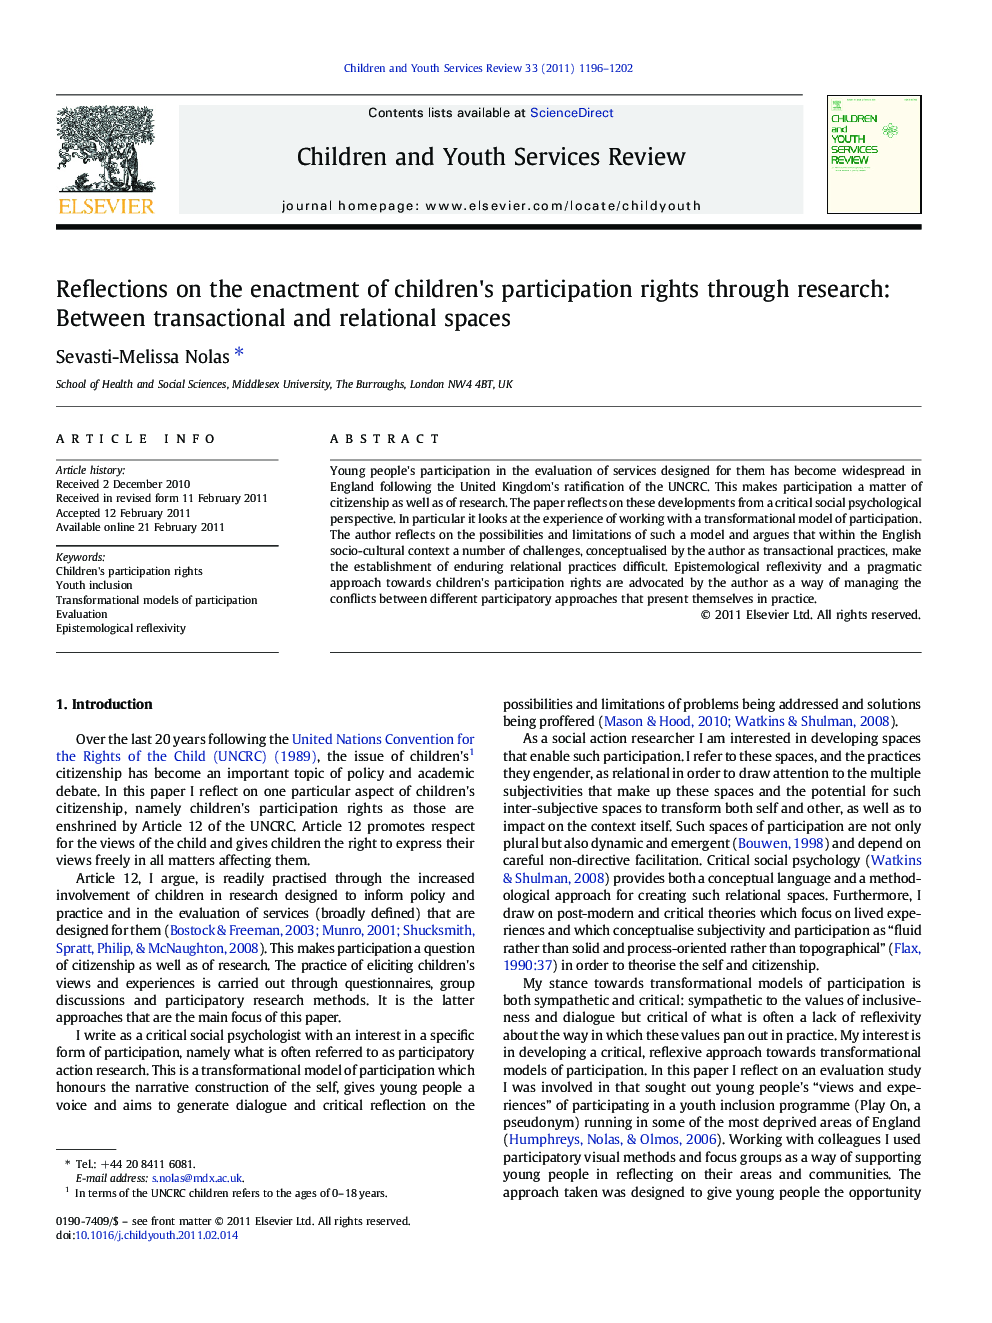 Reflections on the enactment of children's participation rights through research: Between transactional and relational spaces